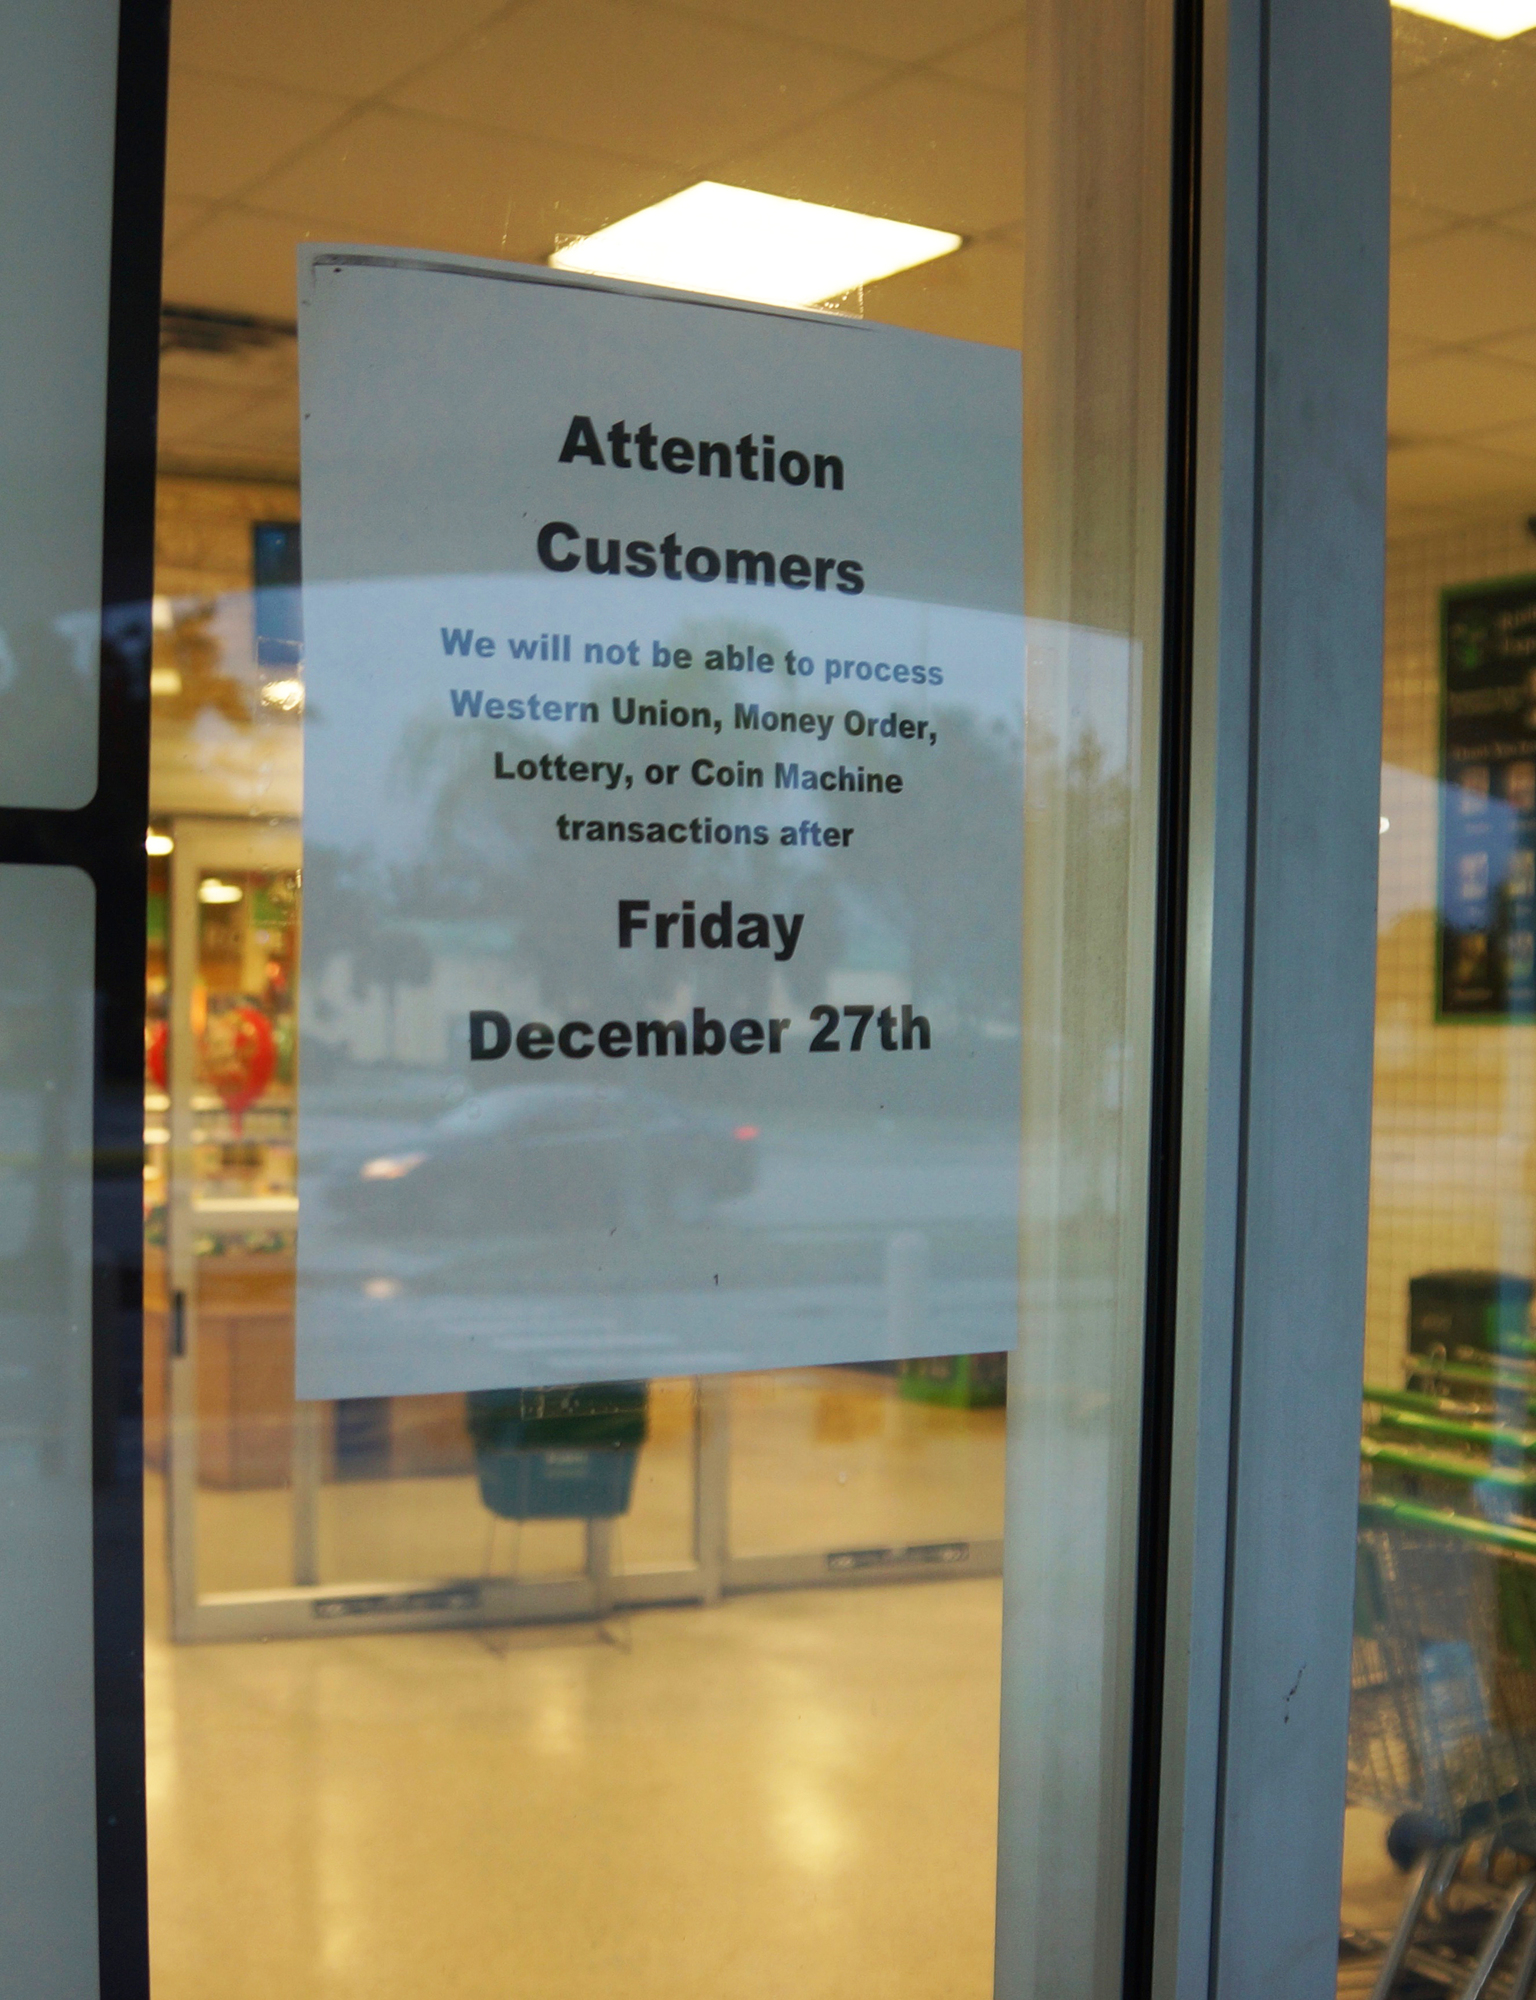 The store closing means Lottery winners will have to go elsewhere to collect their prizes.